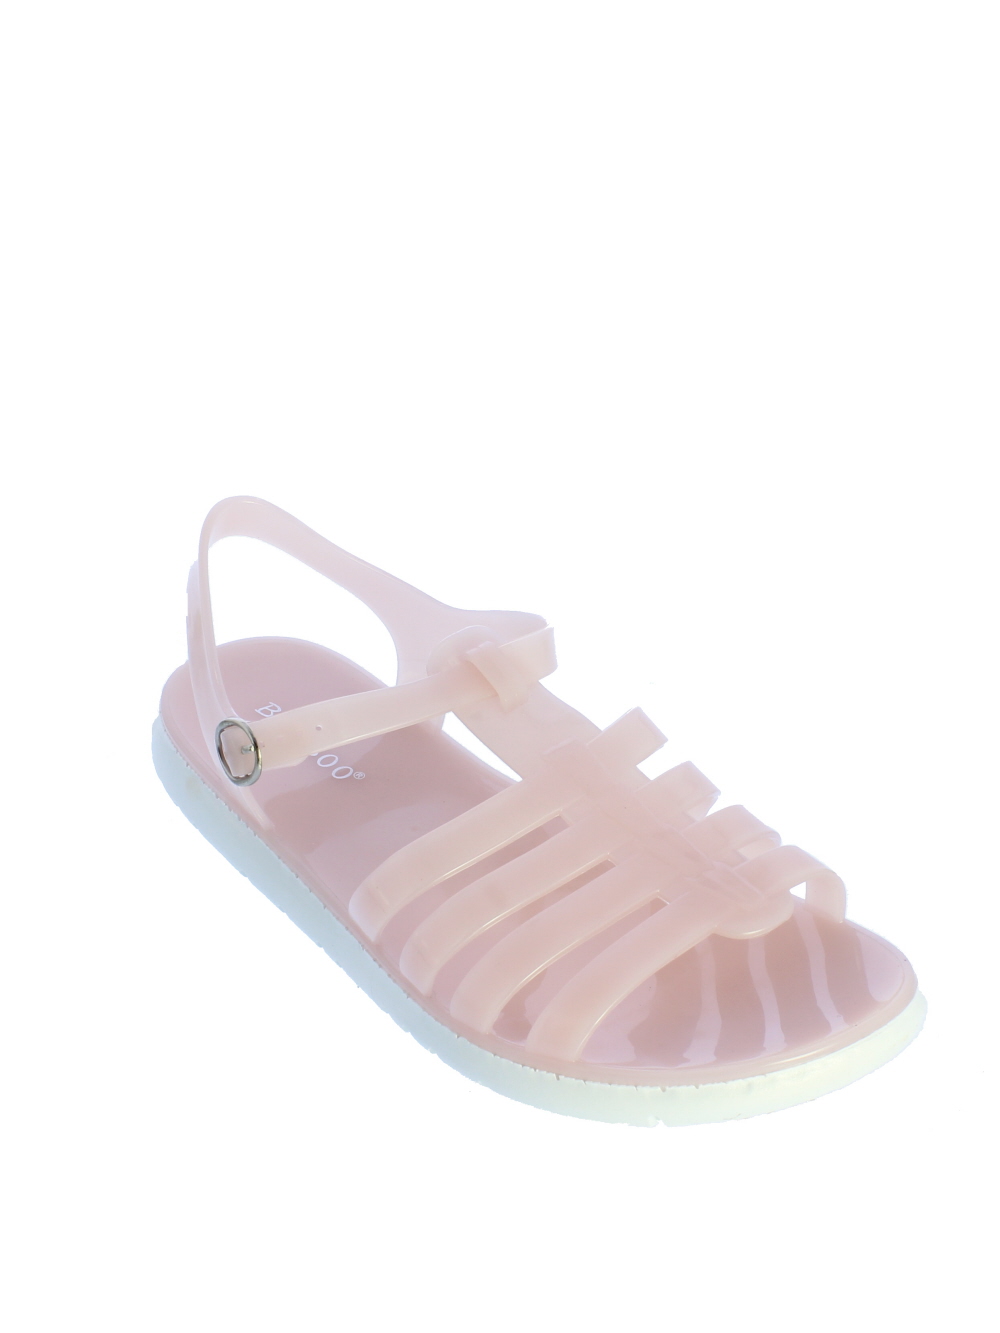 Detail Bamboo Brand Jelly Sandals Nomer 2